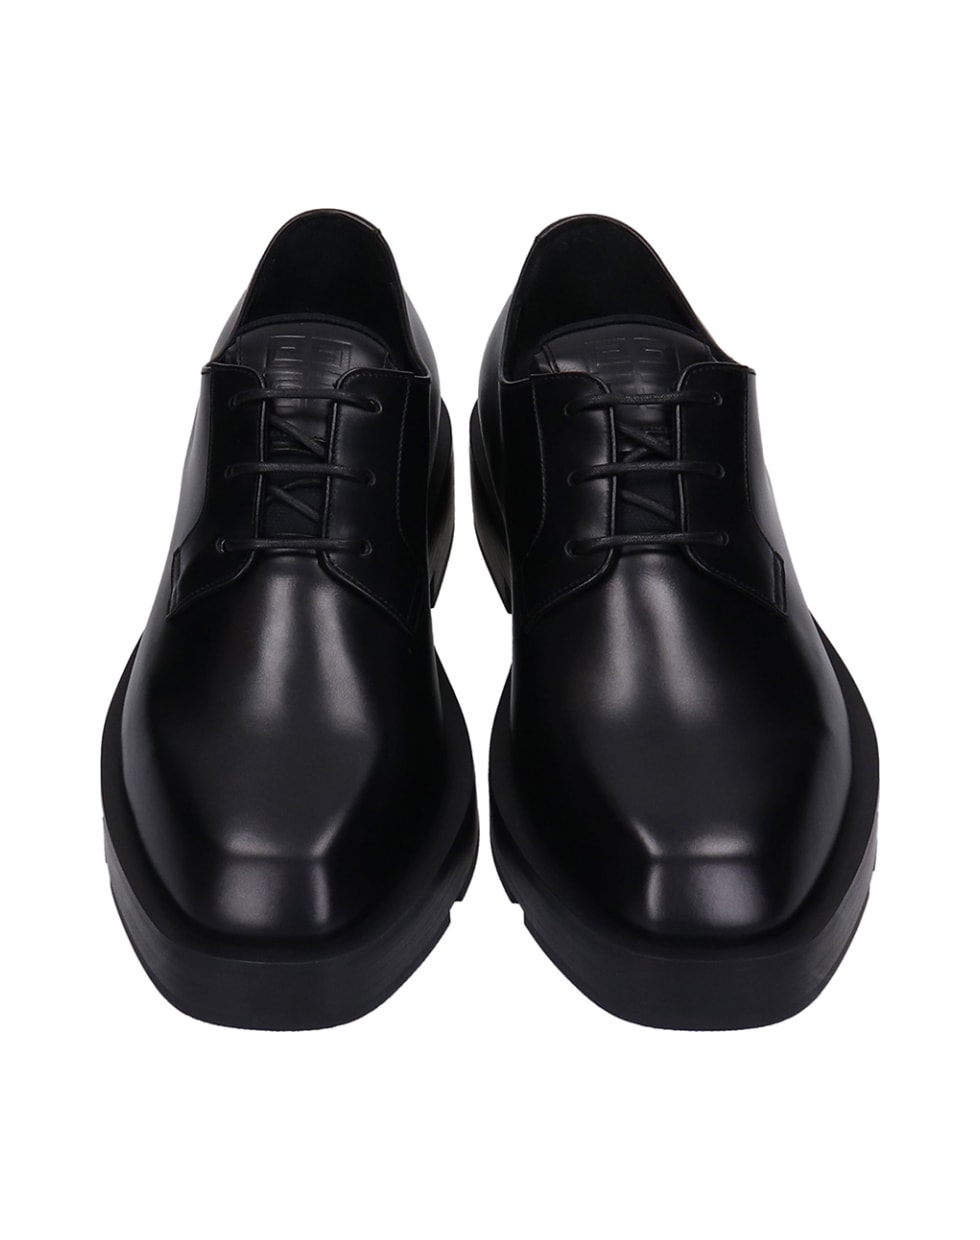 Givenchy Derby Squared Lace Up Shoes In Black Leather - Nero